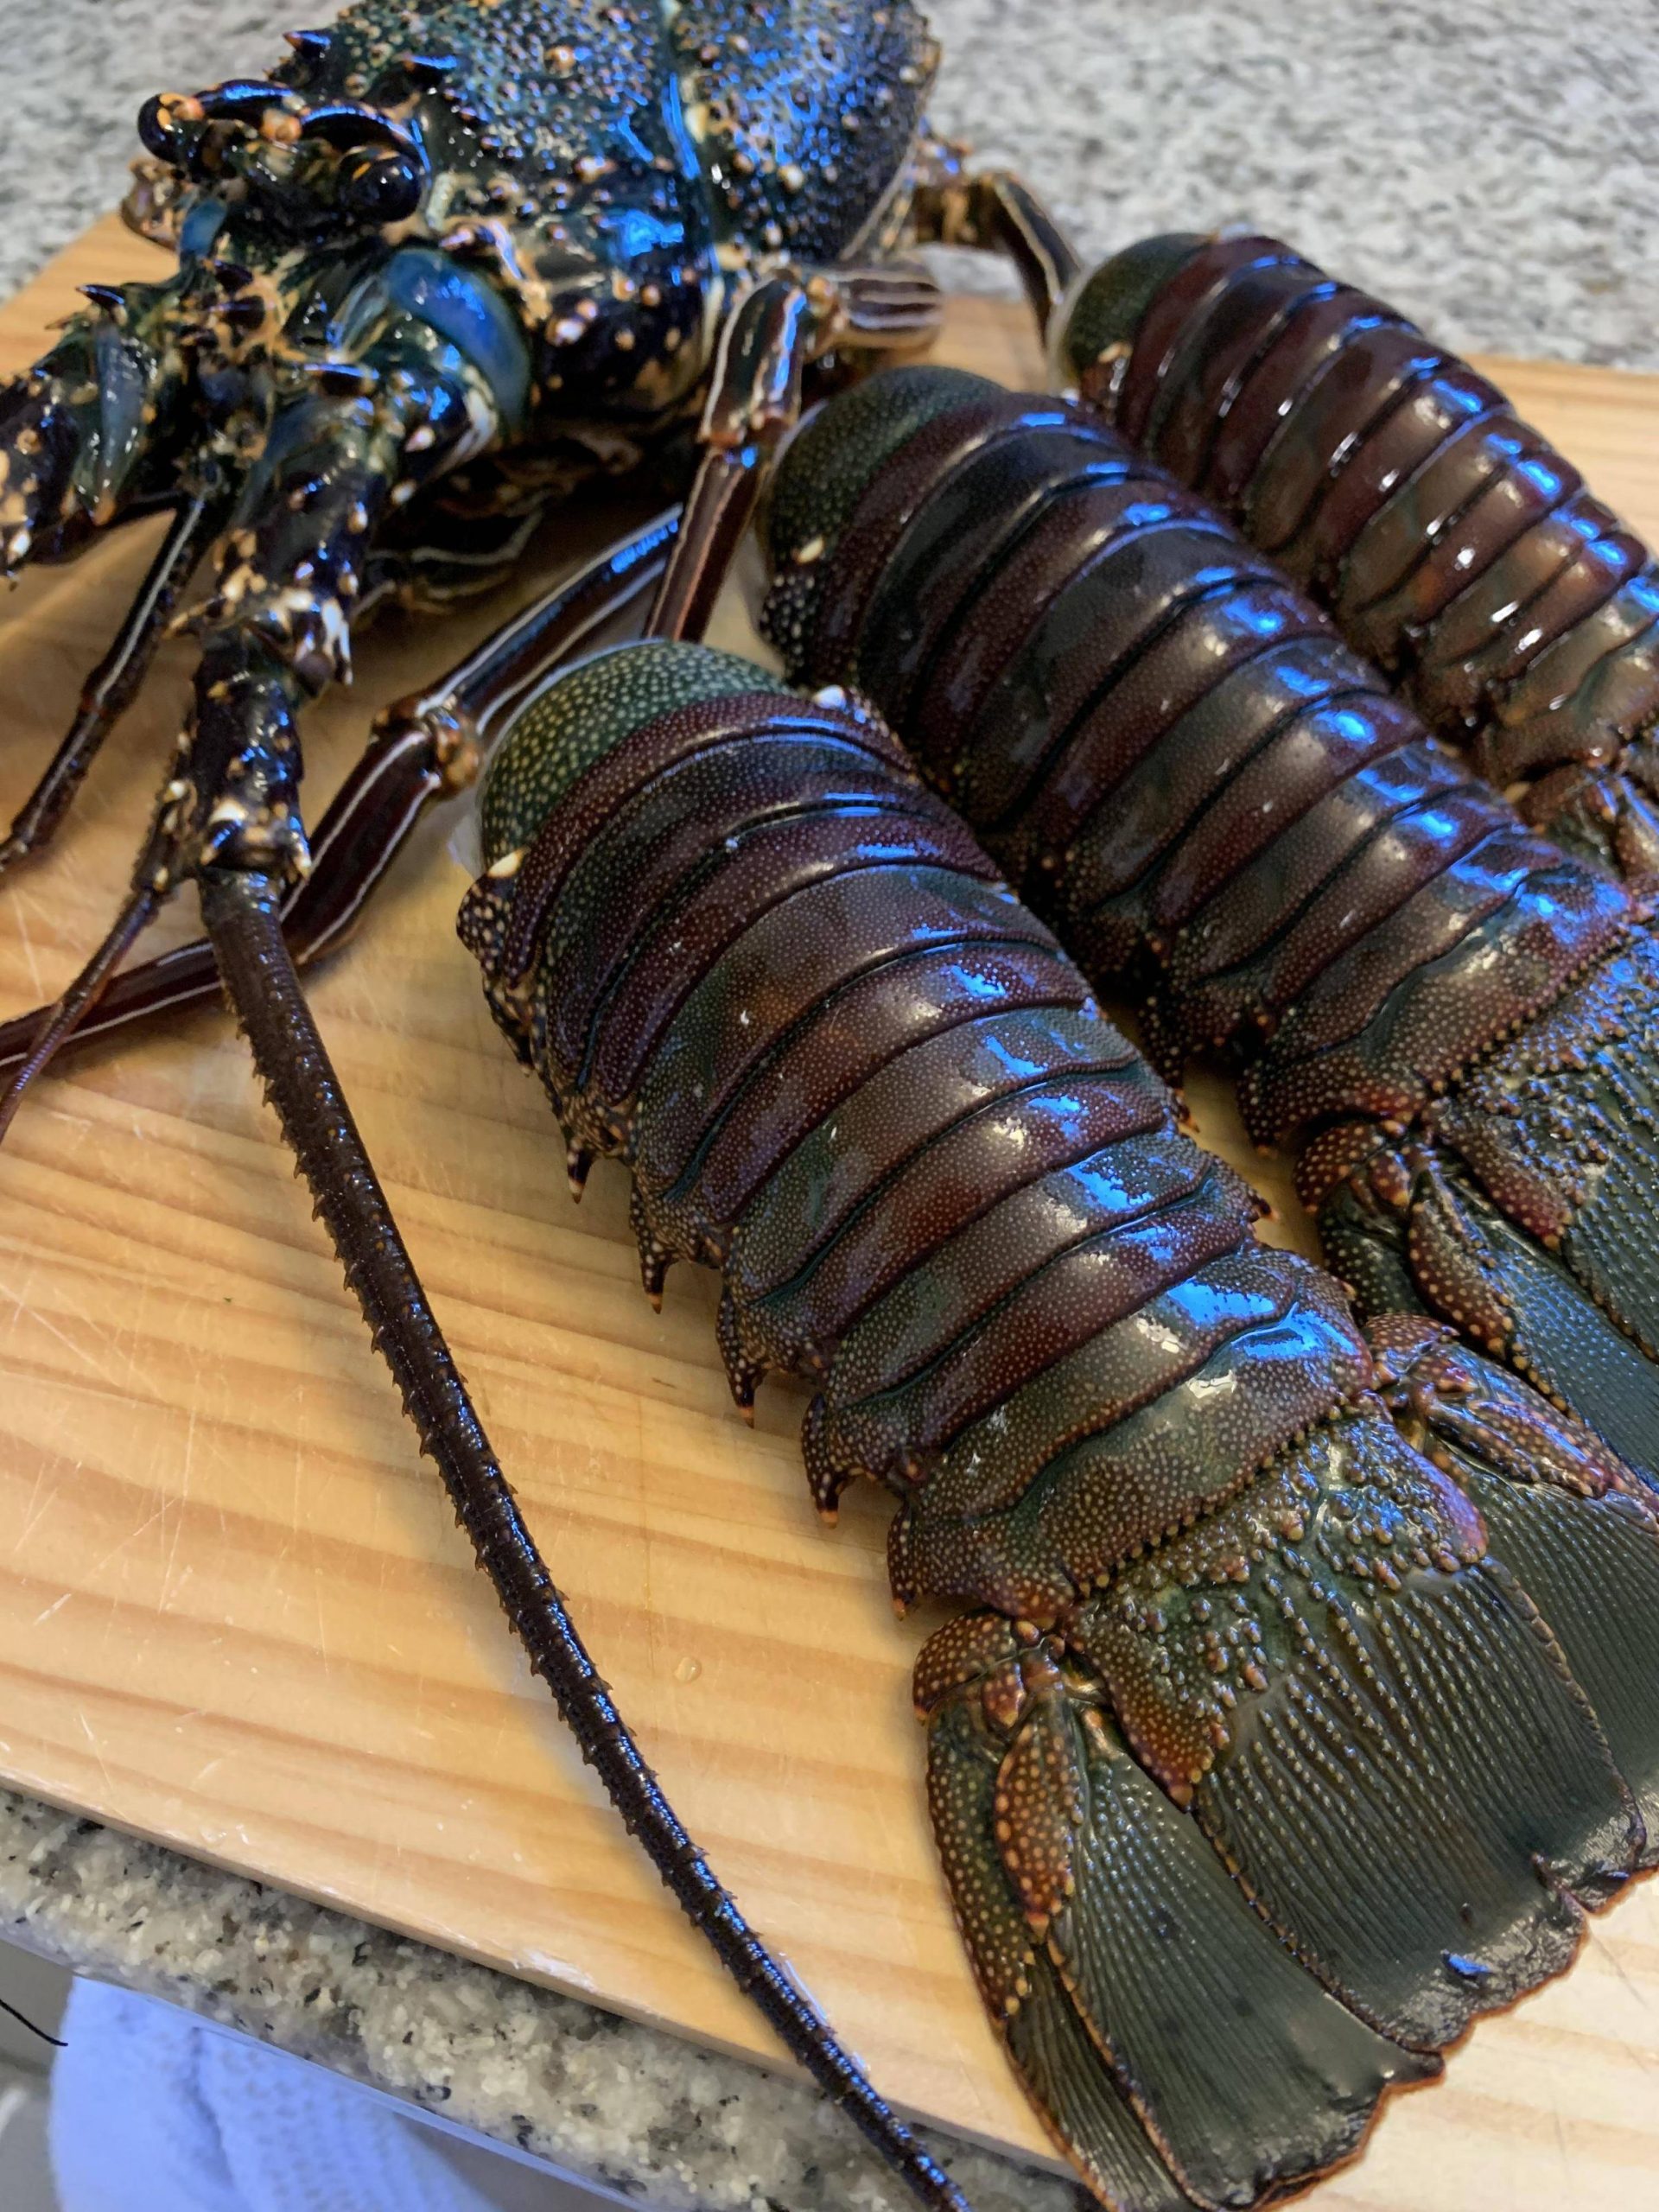 What Is The Minimum Internal Cooking Temperature For Whole Lobster